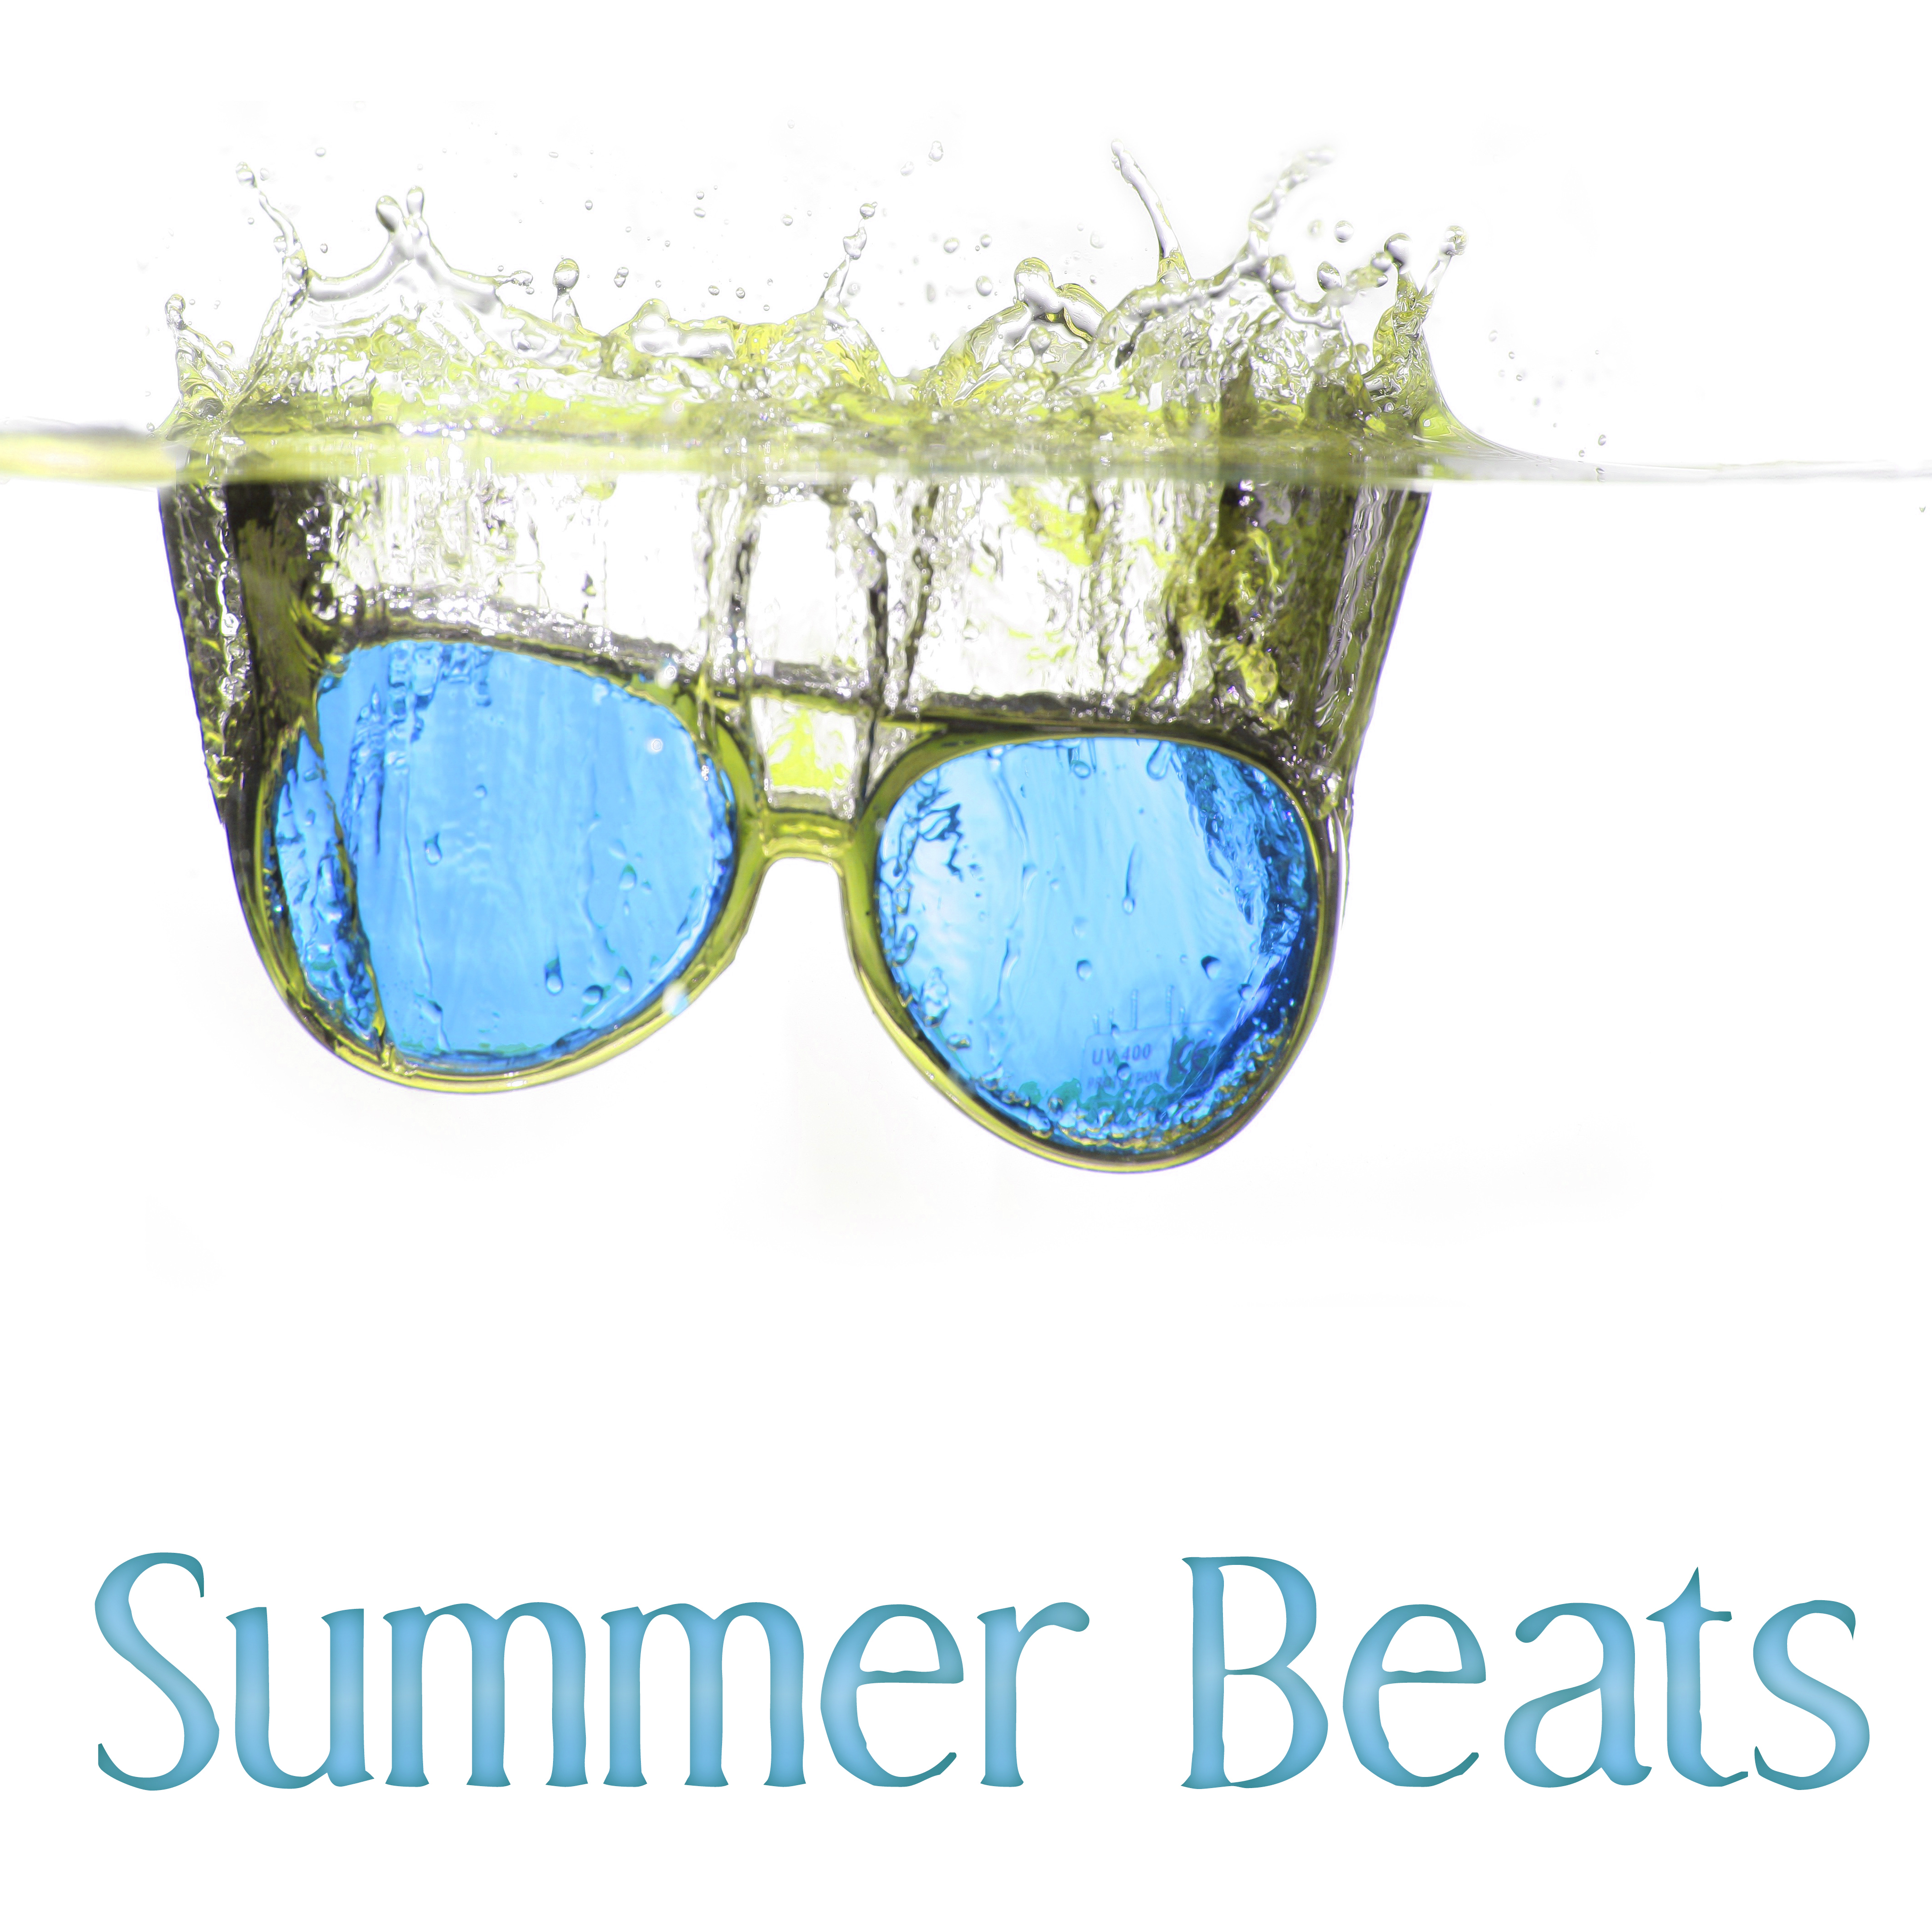 Summer Beats – Hot Holiday with Chill Out Music, Lounge Summer